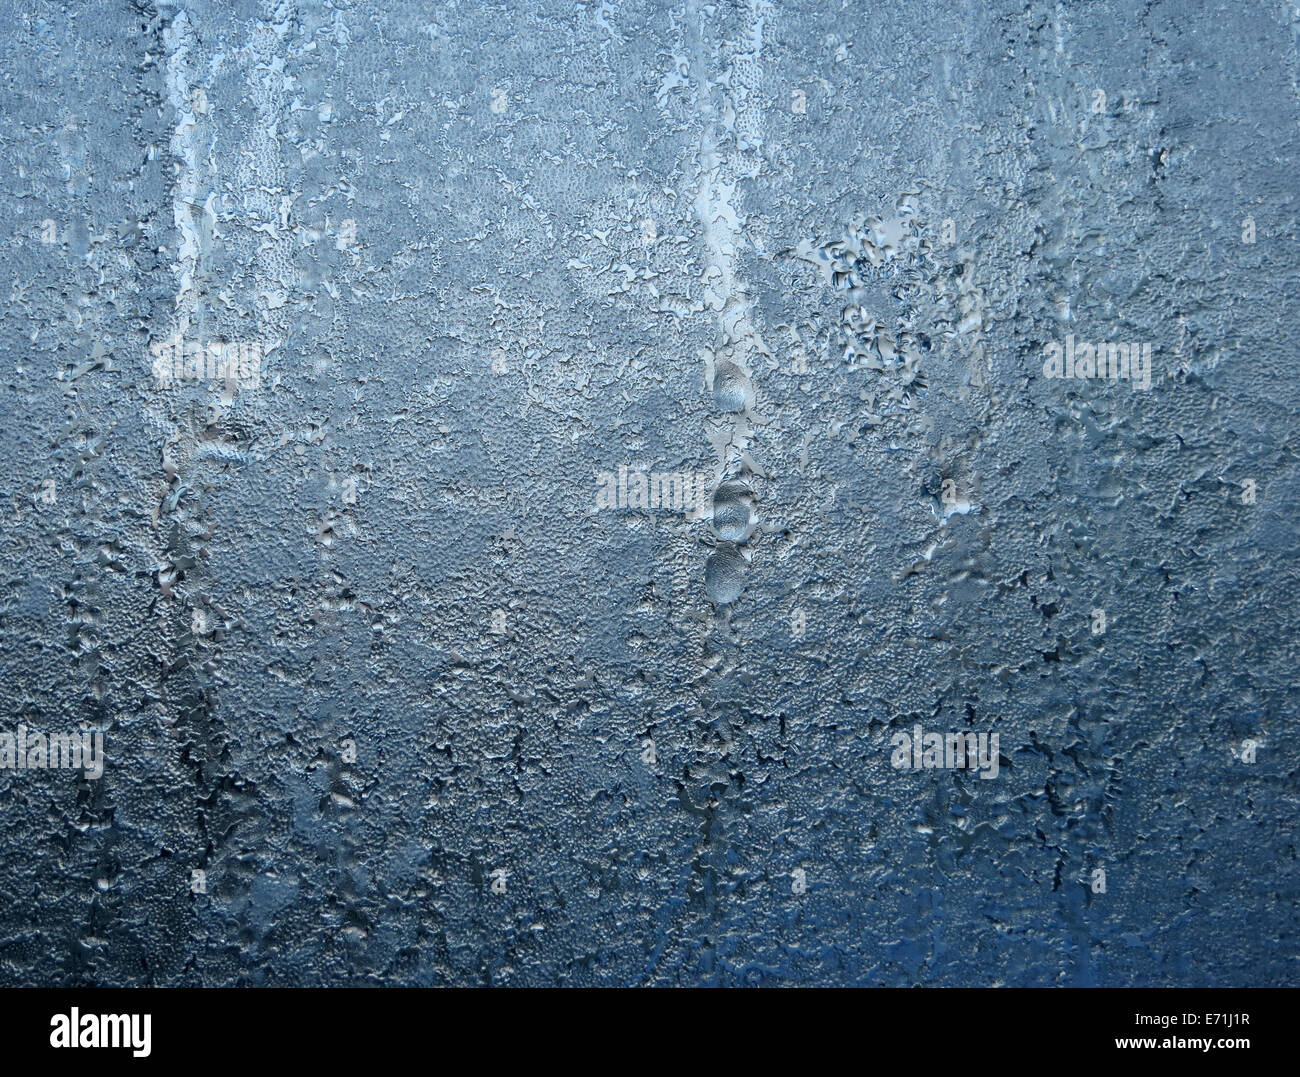 Closeup of section of frozen glass window creating an interesting ice pattern Stock Photo